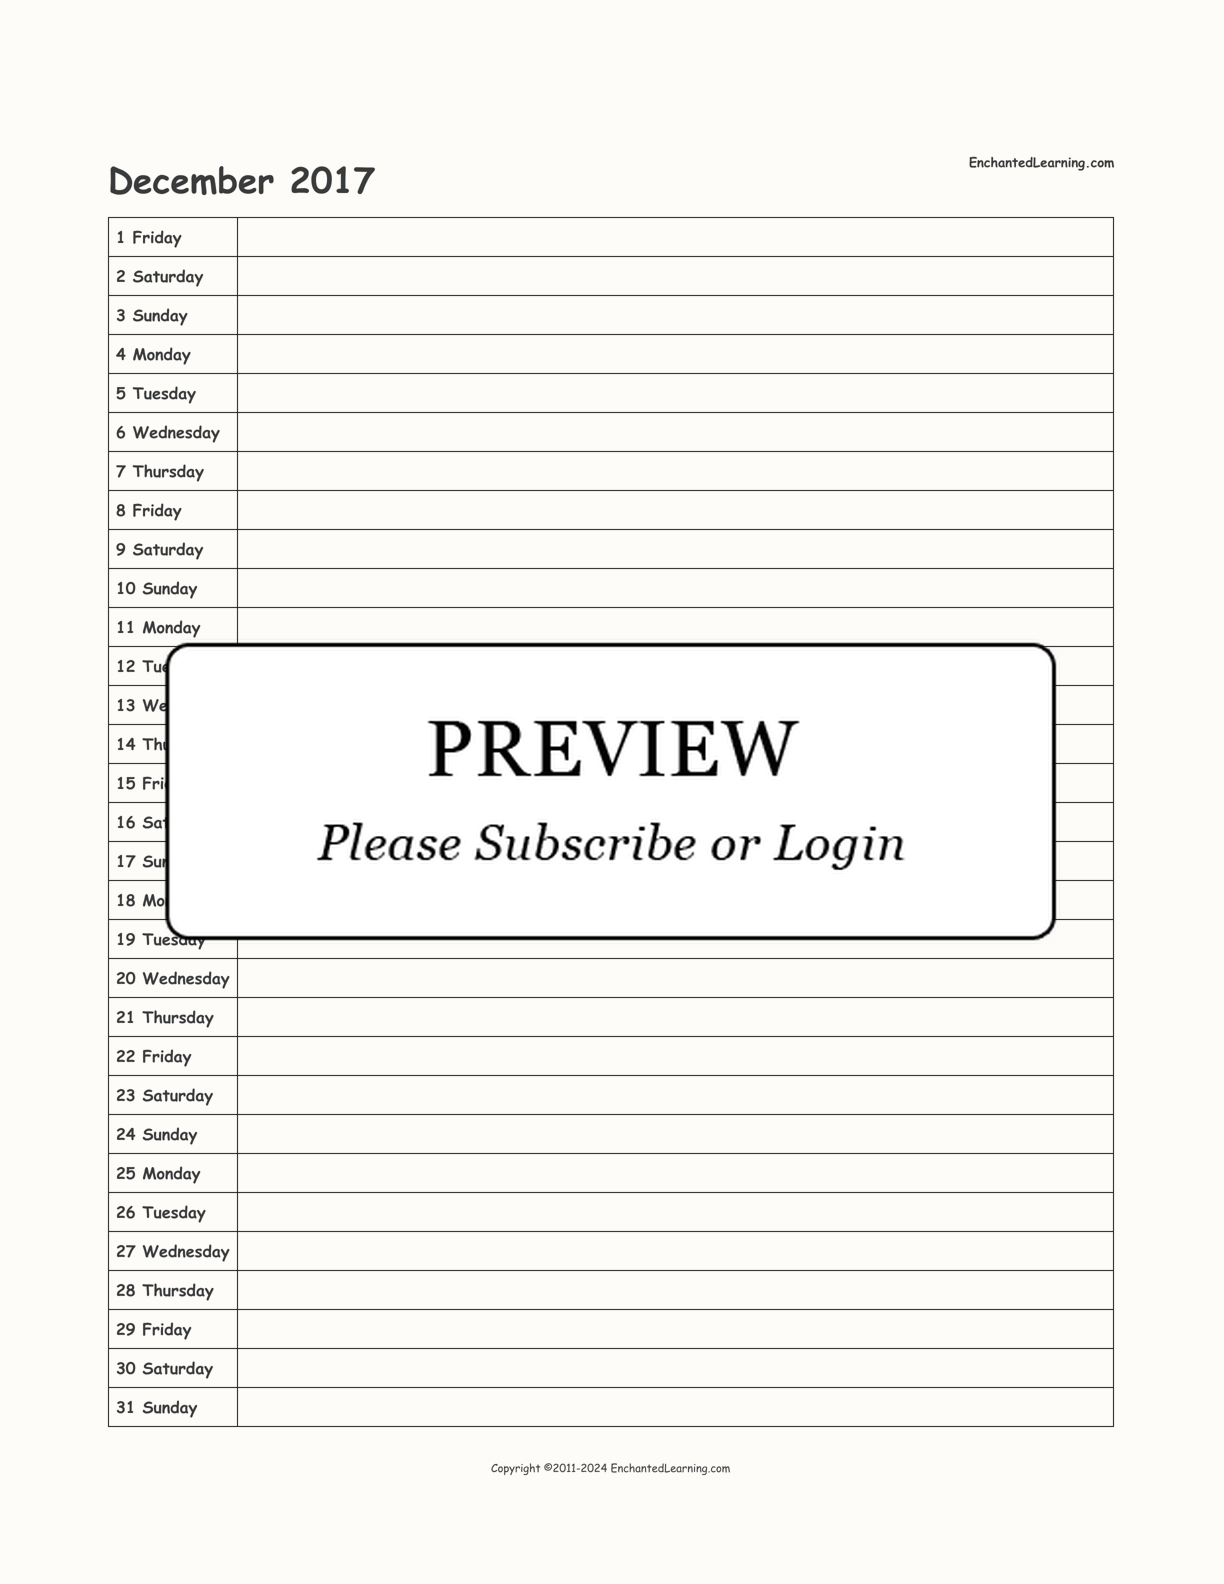 2017 Scheduling Calendar interactive printout page 12